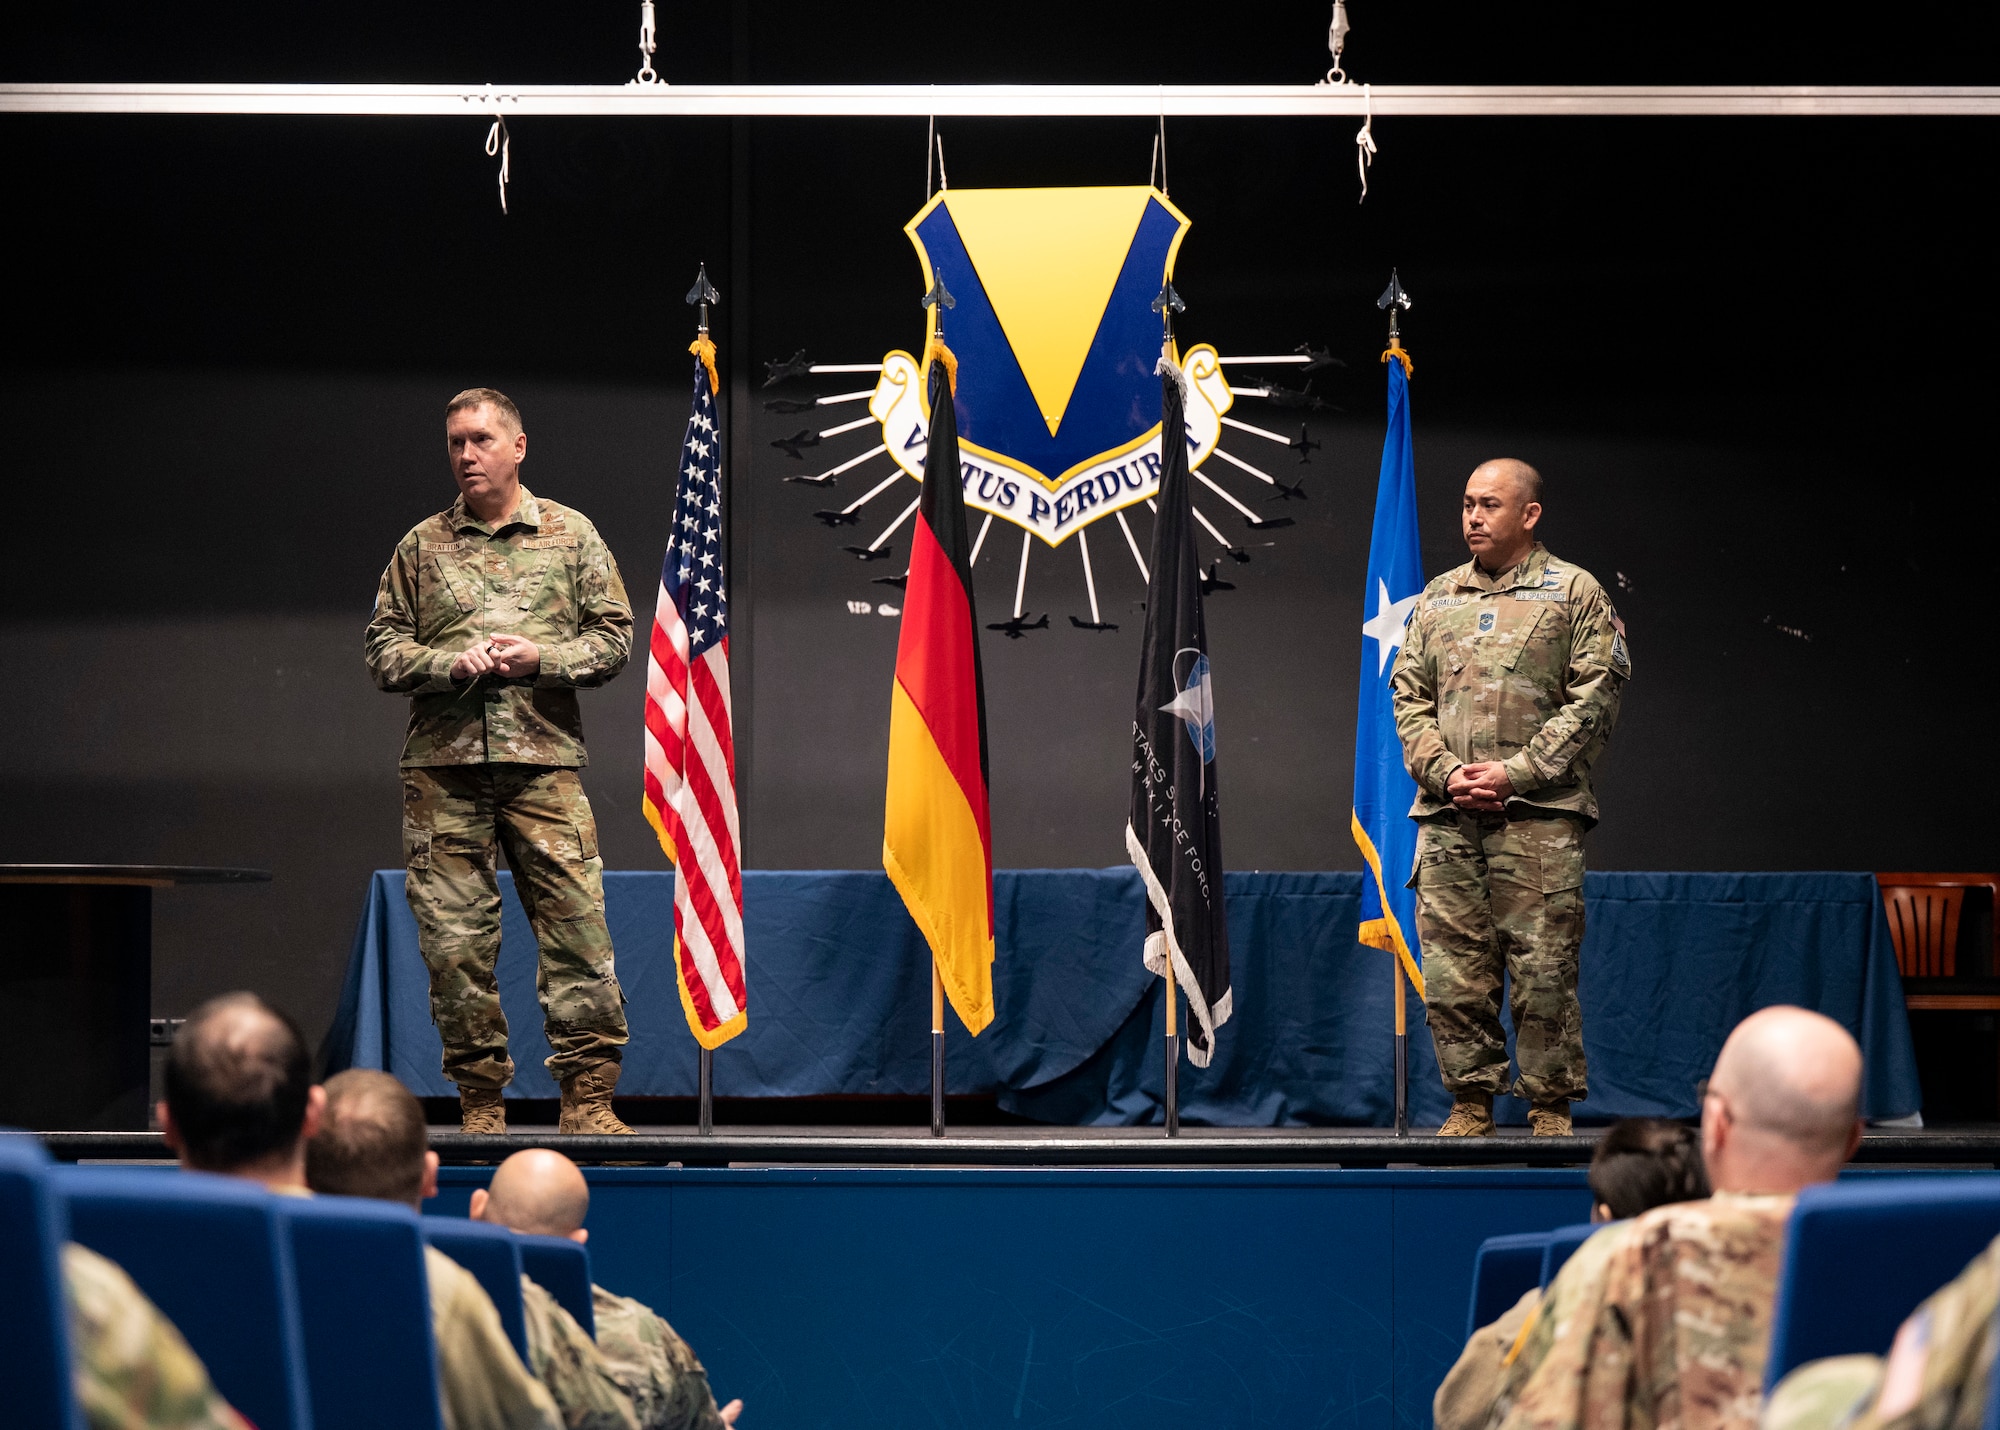 Maj. Gen. Shawn Bratton, commander of Space Training and Readiness Command, left, and U.S. Space Force Chief Master Sgt. James Seballes, senior enlisted leader of Space Training and Readiness Command, right speaks with Guardians and Airmen during an all-call at Ramstein Air Base, Germany, Feb. 1, 2023. During the all-call, Bratton and Seballes, met with and heard from Guardians and Airmen executing and supporting space operations in the U.S. European Command area of responsibility. (U.S. Air Force photo by 1st Lt. Charles Rivezzo)